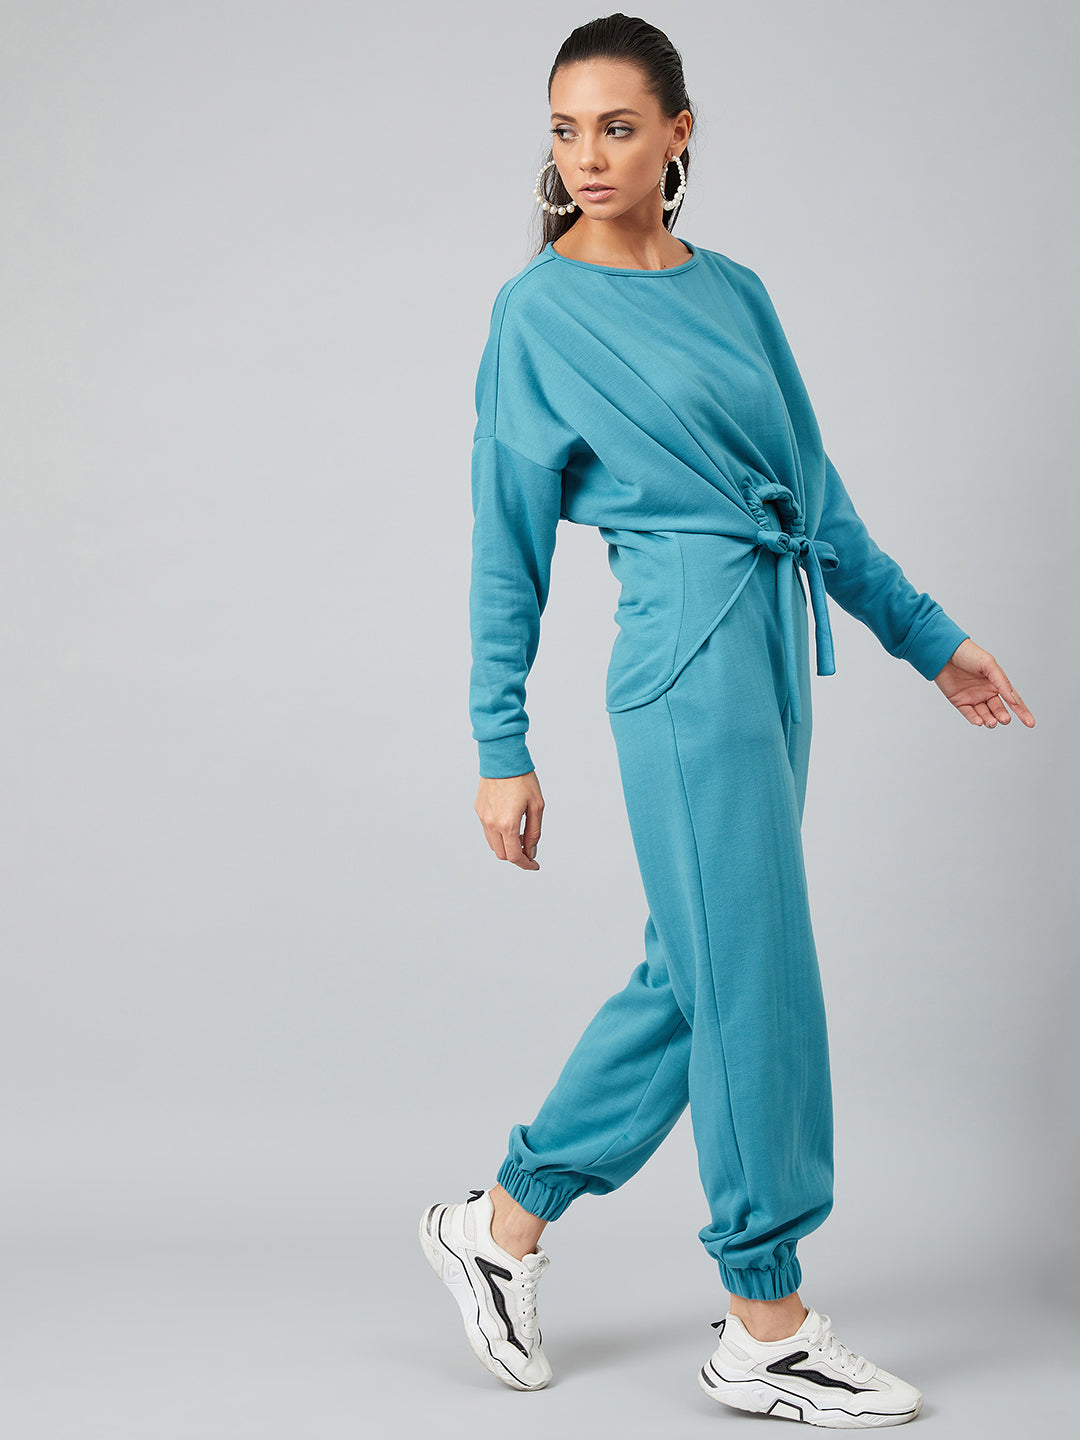 Athena Women Blue Solid Top with Trousers - Athena Lifestyle